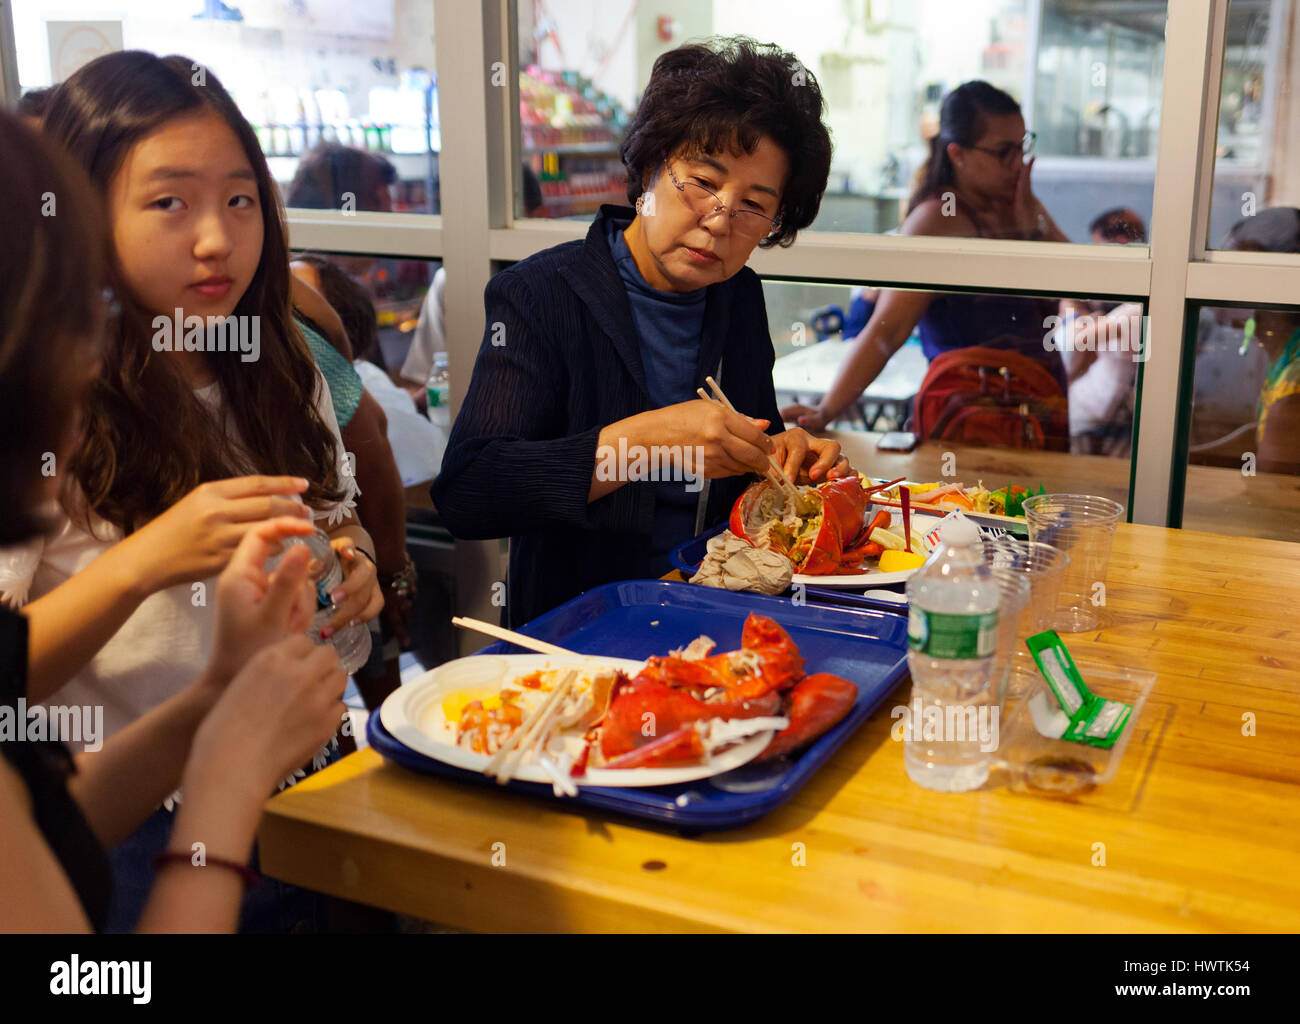 New York City, Usa - July 12, 2015: Asian tourists eating fresh lobsters in Chelsea Market. The market has a number of eateries and food outlets. Stock Photo